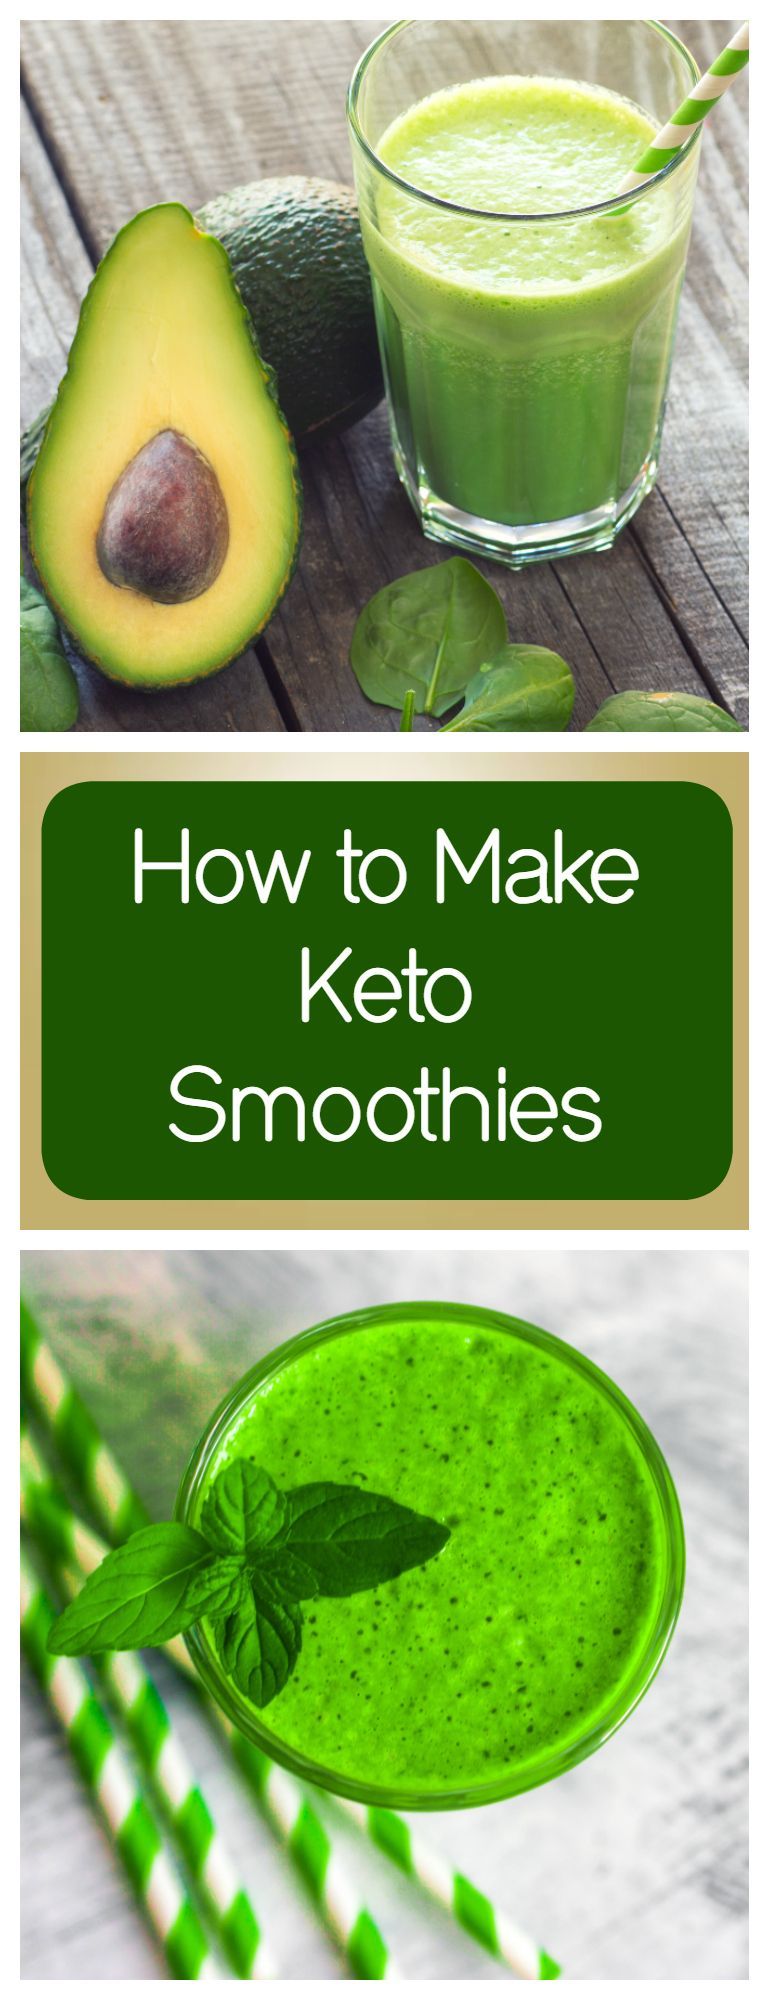 How to make low carb keto smoothies. These keto smoothie recipes are perfect for addressing diabetes or for weight loss. Learn how